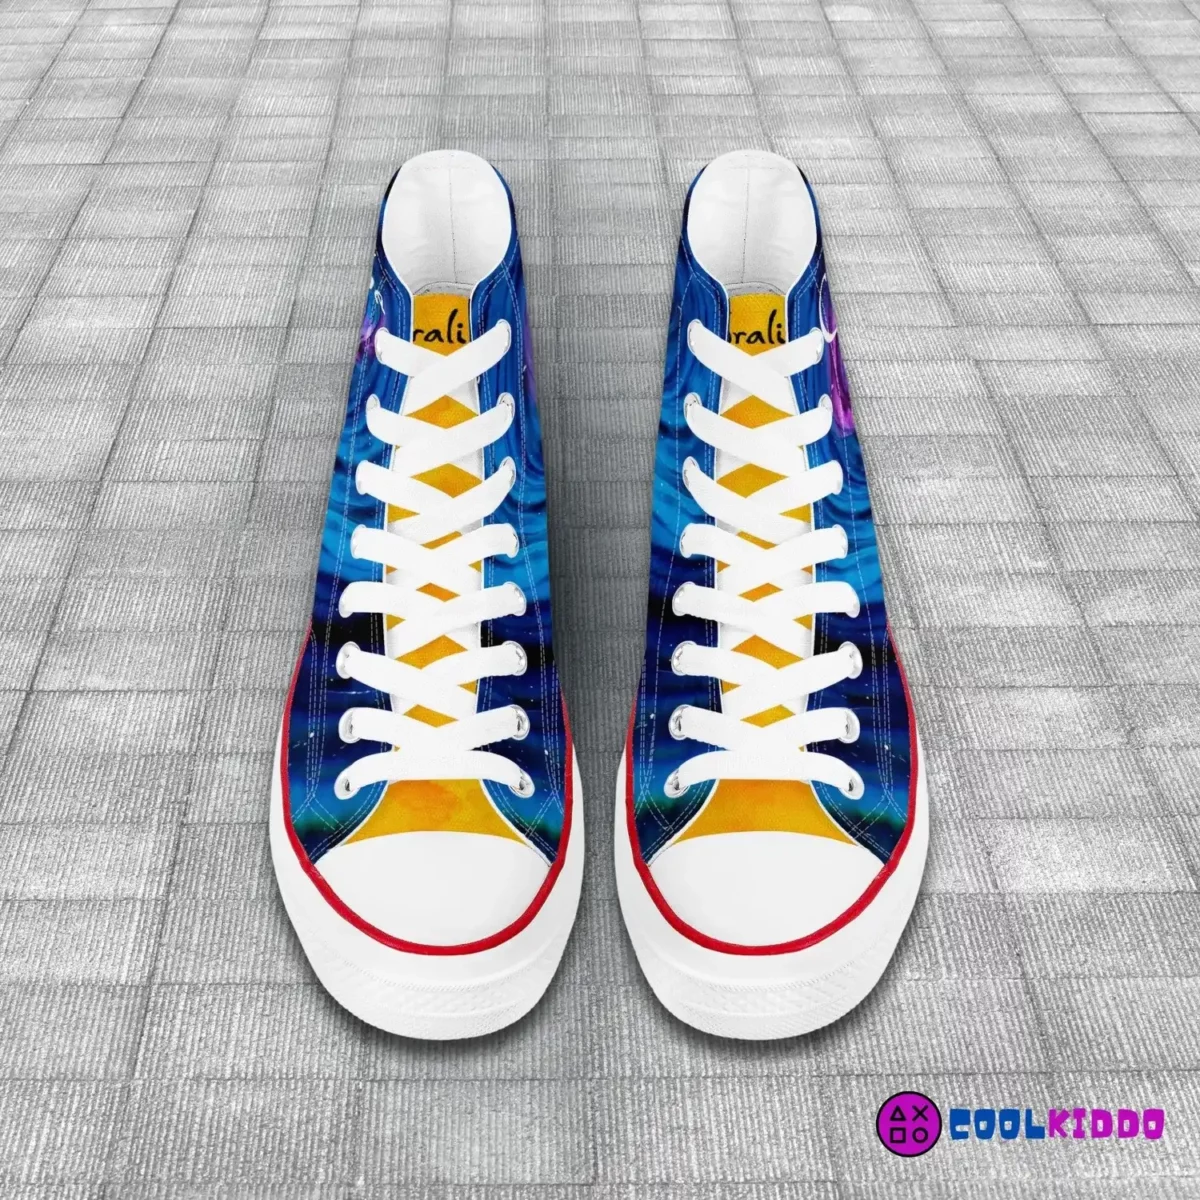 Custom Coraline High-Top Canvas Sneakers, Tim Burton’s animated movie Inspired Casual Shoes for Youth/Adults Cool Kiddo 26